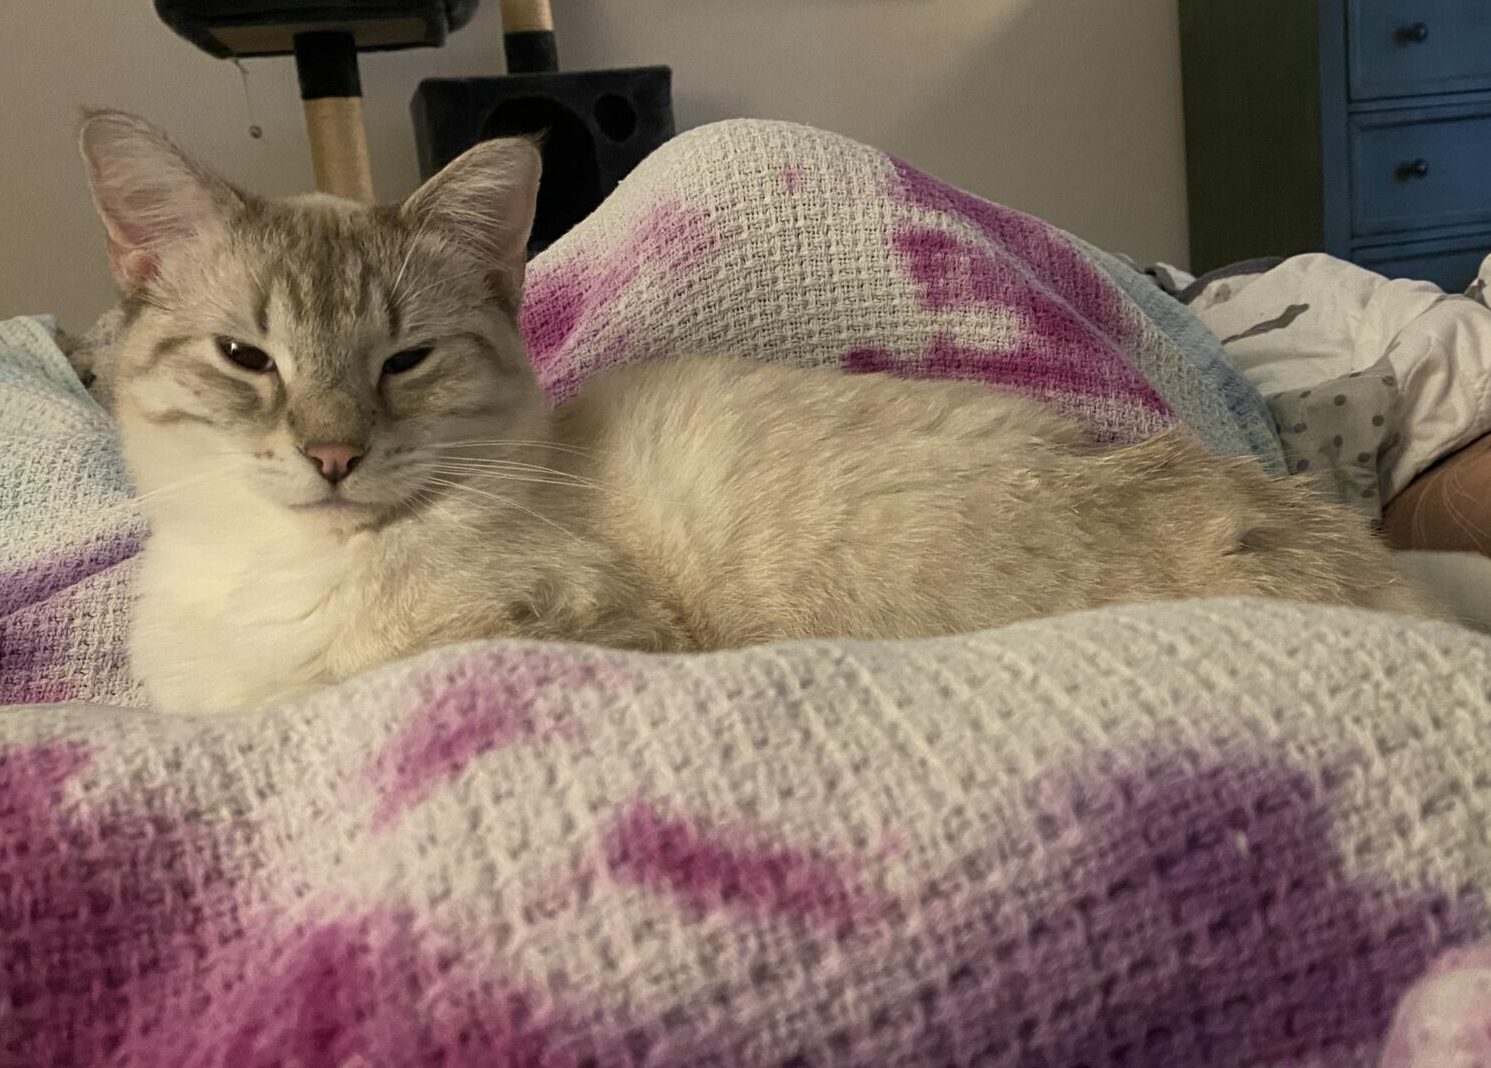 Poutine, a lynx point Siamese cat, lays on a purple, blue, and white tie-dye blanket with his eyes half opened.